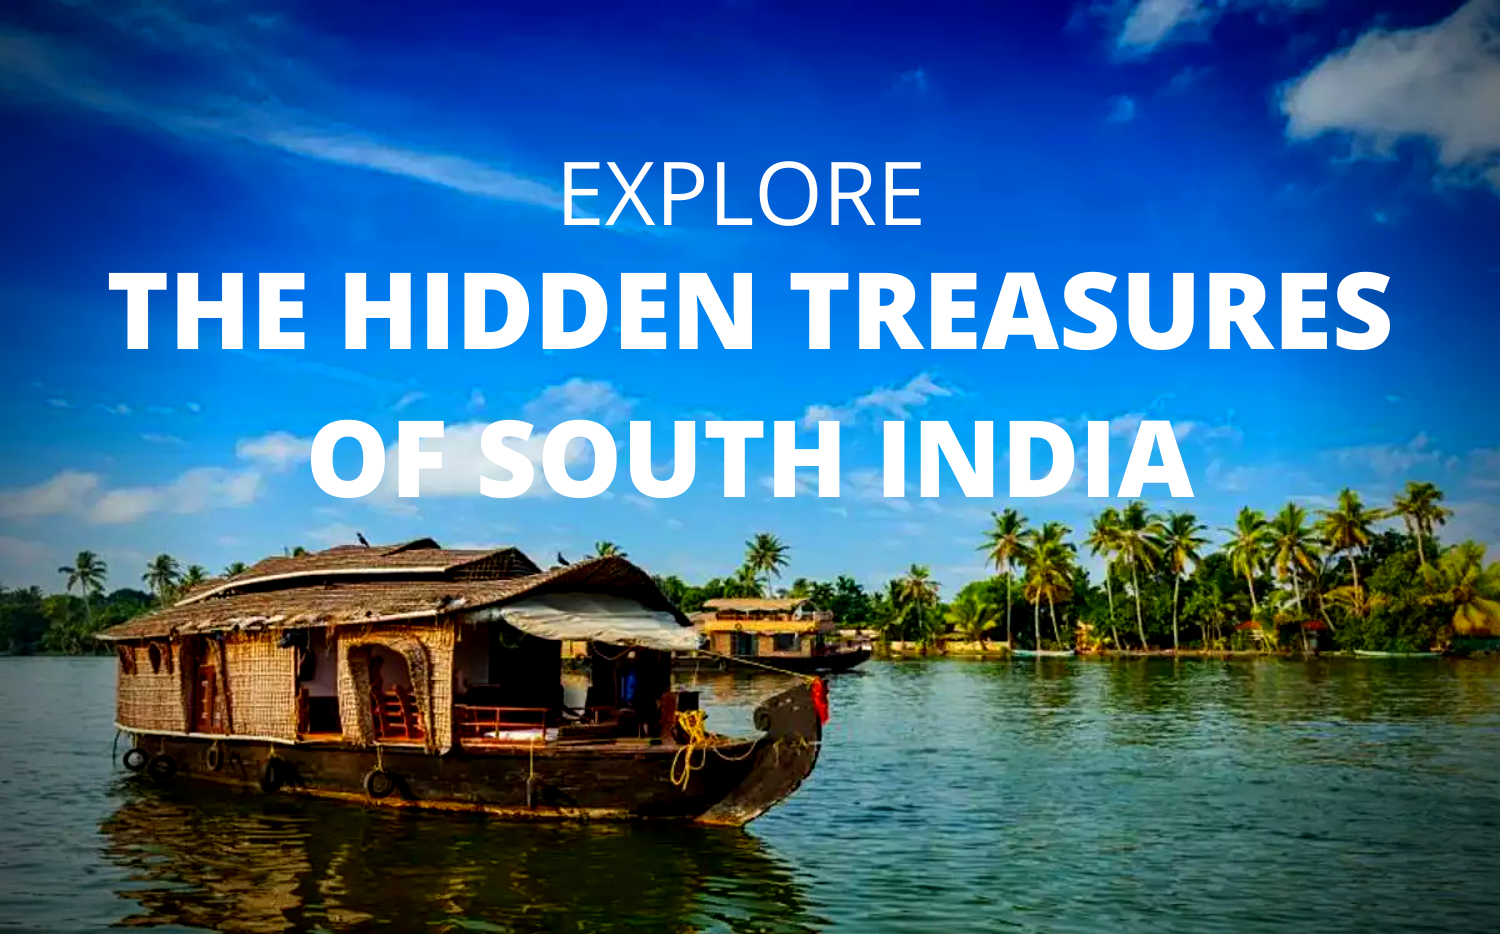 Invite Your Friends For A Group Tour To Kerala And Explore The Hidden Treasures Of South India Together